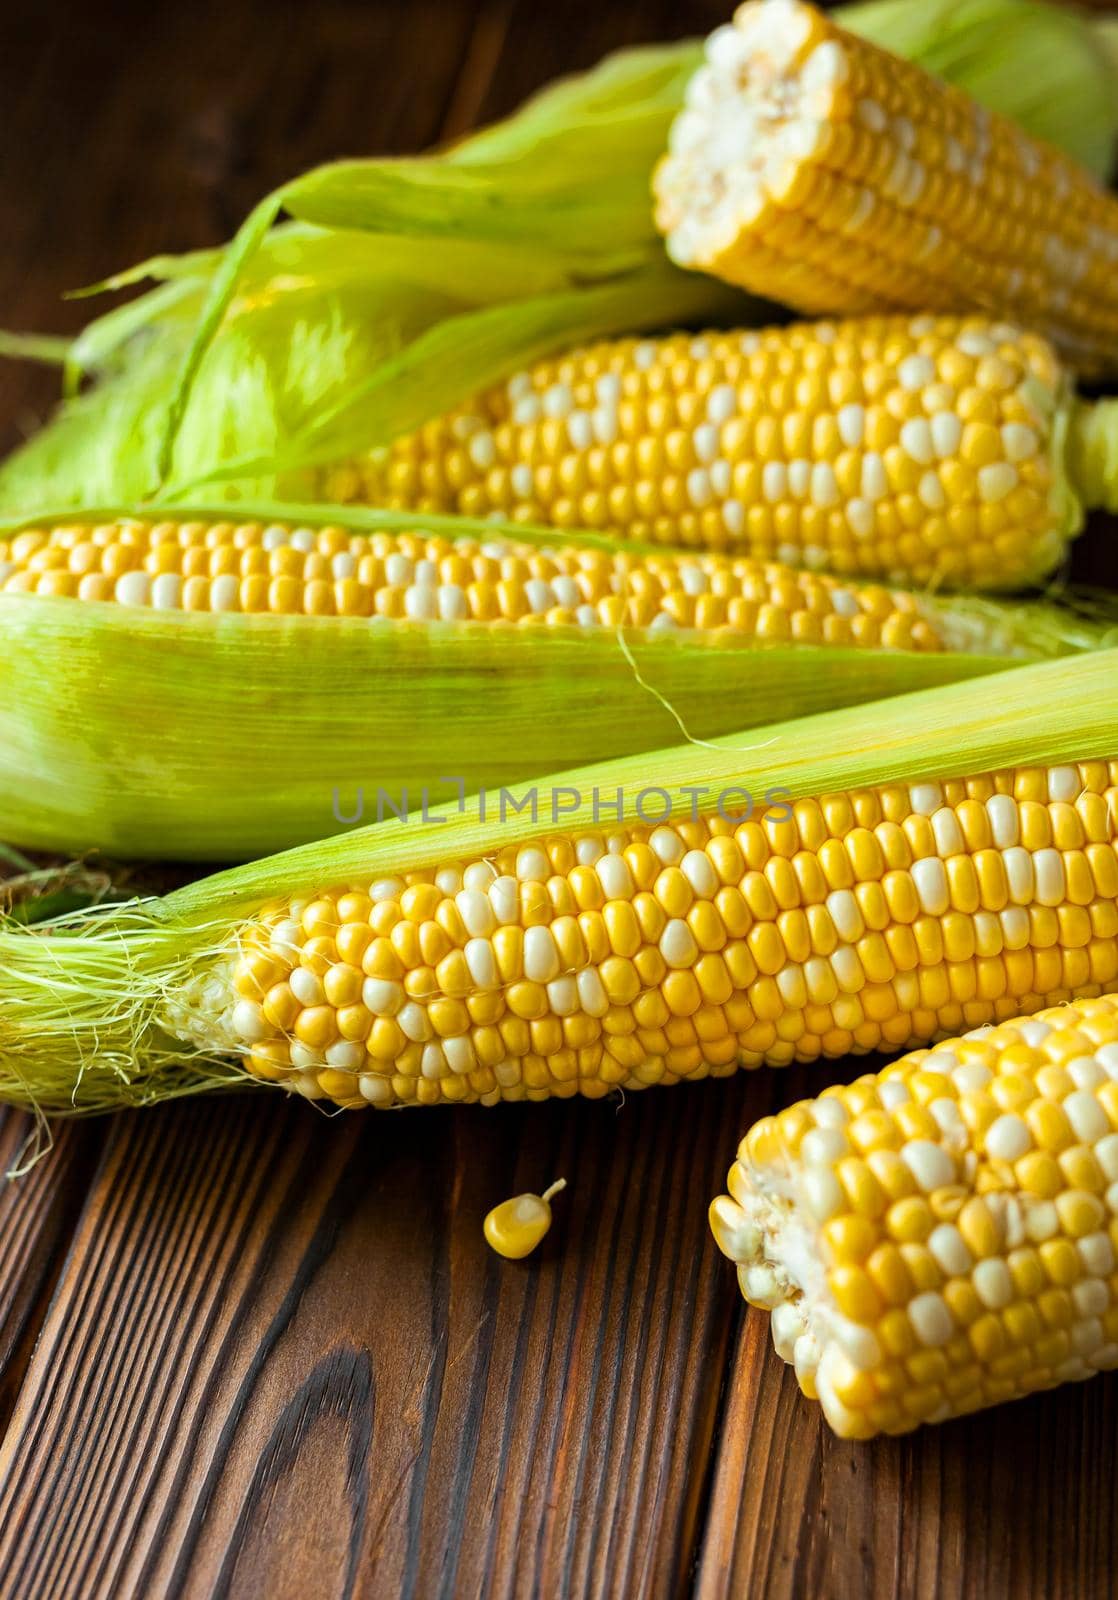 Fresh sweet corn with leaves on cobs on wooden table, closeup, top view. Fresh yellow corns ears with leaves. Ears of freshly harvested yellow sweet corn on wooden table.